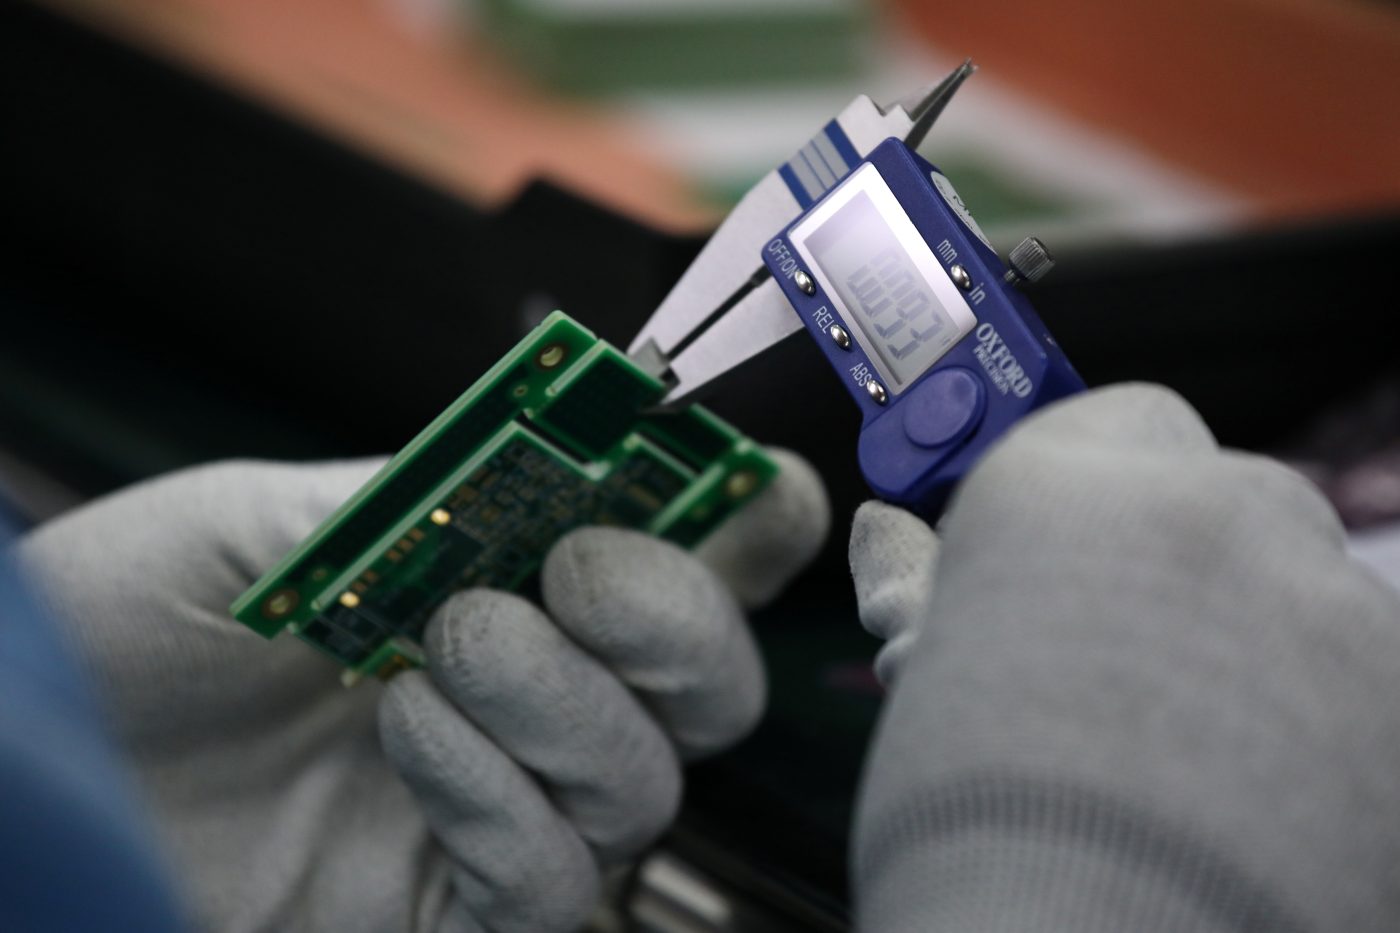 Photo: An employee of the automated test equipment designer and solutions provider Aemulus Holdings Berhad inspects a printed circuit board at a production facility in Penang, Malaysia, September 20, 2019. Picture taken September 20, 2019. Credit: REUTERS/Lim Huey Teng